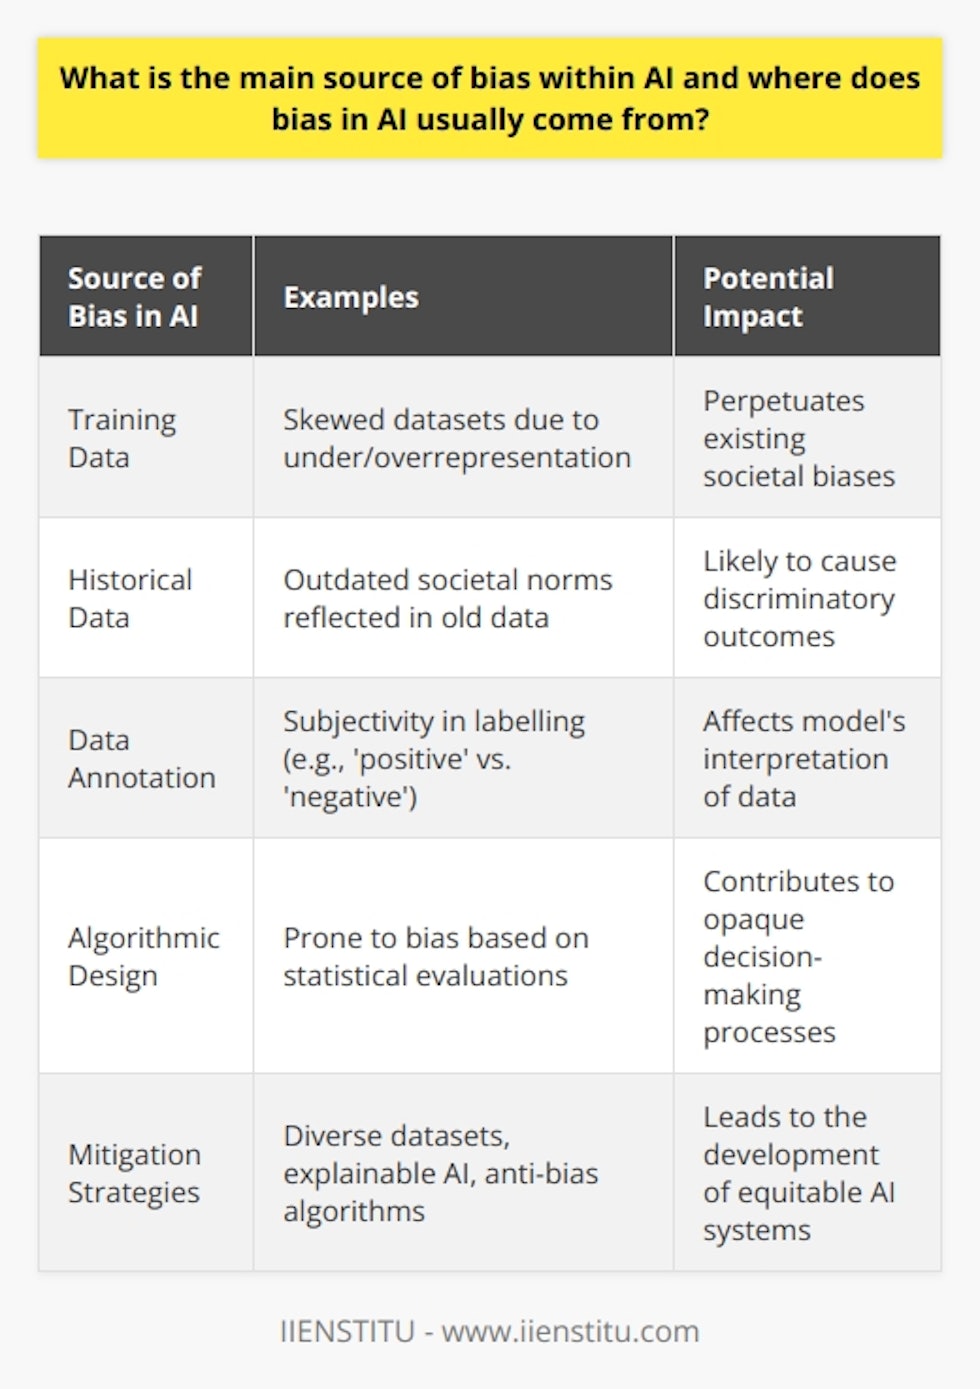 The proliferation of artificial intelligence in various spheres of society has brought to light concerns regarding bias in AI systems. Bias in AI can perpetuate inequality and discrimination and thus is a significant challenge to be addressed in the development of ethical and effective AI technologies.Training Data: The Reflection of Pre-existing Human BiasesThe primary catalyst for bias within AI comes from the training data. Machine learning algorithms, which form the backbone of most AI systems, learn to make decisions by recognizing patterns in large datasets. If these datasets are skewed in any way through either underrepresentation or overrepresentation of certain populations or characteristics, the AI model will likely replicate these biases. As a result, training data is often an inadvertent mirror of societal biases—be it gender, racial, socio-economic, or cultural.Underrepresentation and Historical DataUnderrepresentation is a common source of bias in AI, particularly when historical data is used for training. Historical data may reflect outdated societal norms and prejudices, which, when fed into AI systems, can lead to discriminatory practices. For example, if a job application AI tool is trained predominantly on data from successful candidates who are disproportionately from a specific demographic group, it may inadvertently favor candidates from that group in future selections.Data Annotation and InterpretationThe way data is annotated and interpreted during the training process can further introduce bias. Data scientists who label datasets might input their personal biases, even subconsciously, affecting how the AI system interprets the information. For instance, subjective decisions about what constitutes 'positive' or 'negative' language in sentiment analysis models can heavily influence the model's understanding of language nuances.Algorithmic BiasBeyond simply the data, the design of the AI algorithm itself can be a source of bias. Some algorithms might be more prone to certain biases based on their design or the statistical techniques they use to evaluate data. Additionally, the opacity of some machine learning models, particularly deep neural networks, makes it challenging to trace how they reach certain decisions, leading to difficulty in identifying and correcting biases.Mitigating AI BiasMitigating bias in AI requires a multi-faceted approach. It is essential to diversify training datasets and to audit them for potential biases continually. Transparency in AI systems, through the development of explainable AI, allows for better understanding and rectification of biases when they occur. Additionally, engaging multidisciplinary teams in the development process helps bring various perspectives into AI design, which can further combat the embedding of bias.Continuous monitoring and evaluation, the application of fairness metrics, and the implementation of anti-bias algorithms are also part of the strategies employed by experts to fight bias in AI. Organizations such as IIENSTITU, which offer educational resources and training focused on emerging technologies including AI, can play a vital role in equipping professionals with the knowledge to build more equitable AI systems.In summary, the issue of bias in AI largely stems from human-related factors in data and algorithm design. Tackling AI bias necessitates a proactive and comprehensive approach that includes careful examination and revision of training data, algorithms, and the ethical framework guiding AI development.